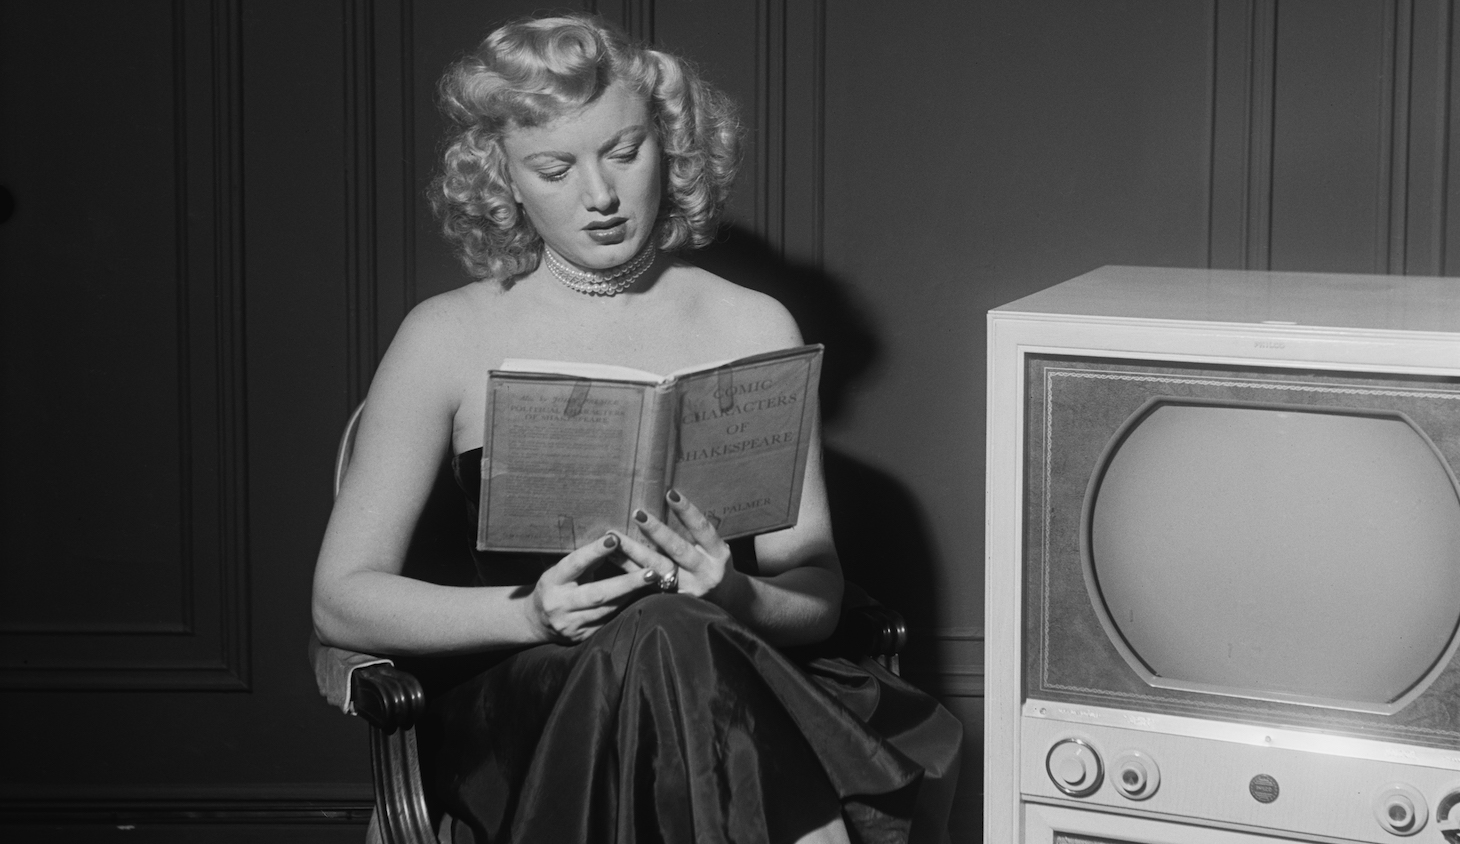 American actress Dagmar (1921 - 2001) reading a book of 'Comic Characters of Shakespeare' by John Palmer, circa 1950. (Photo by Graphic House/Archive Photos/Getty Images)